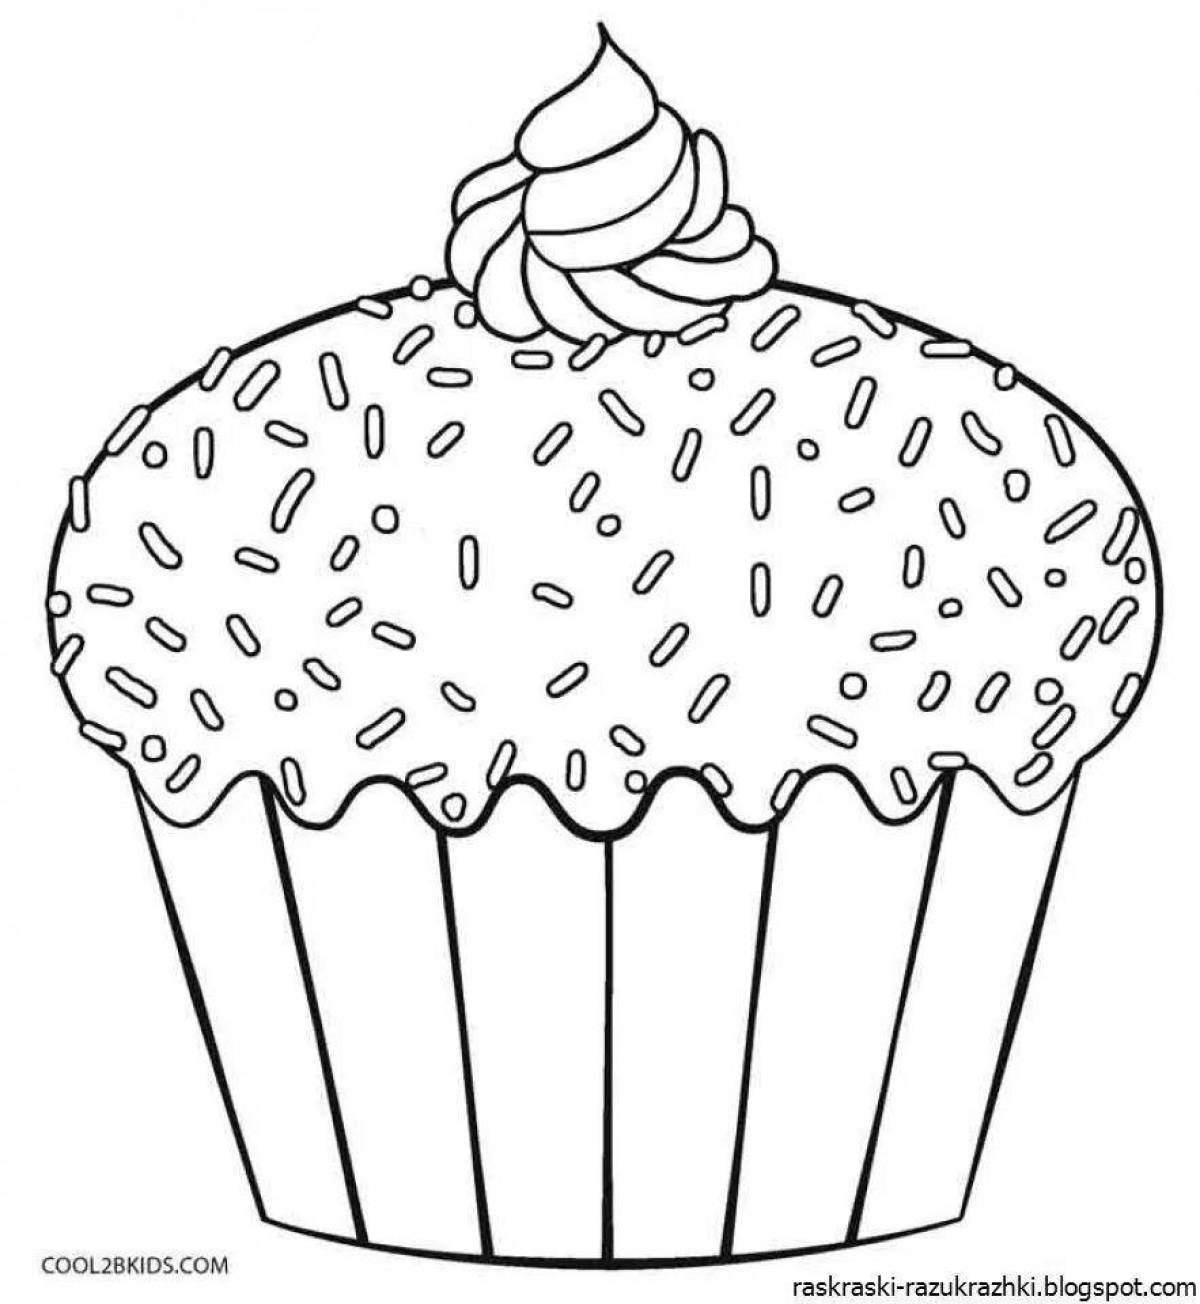 Vibrant cake coloring page for kids